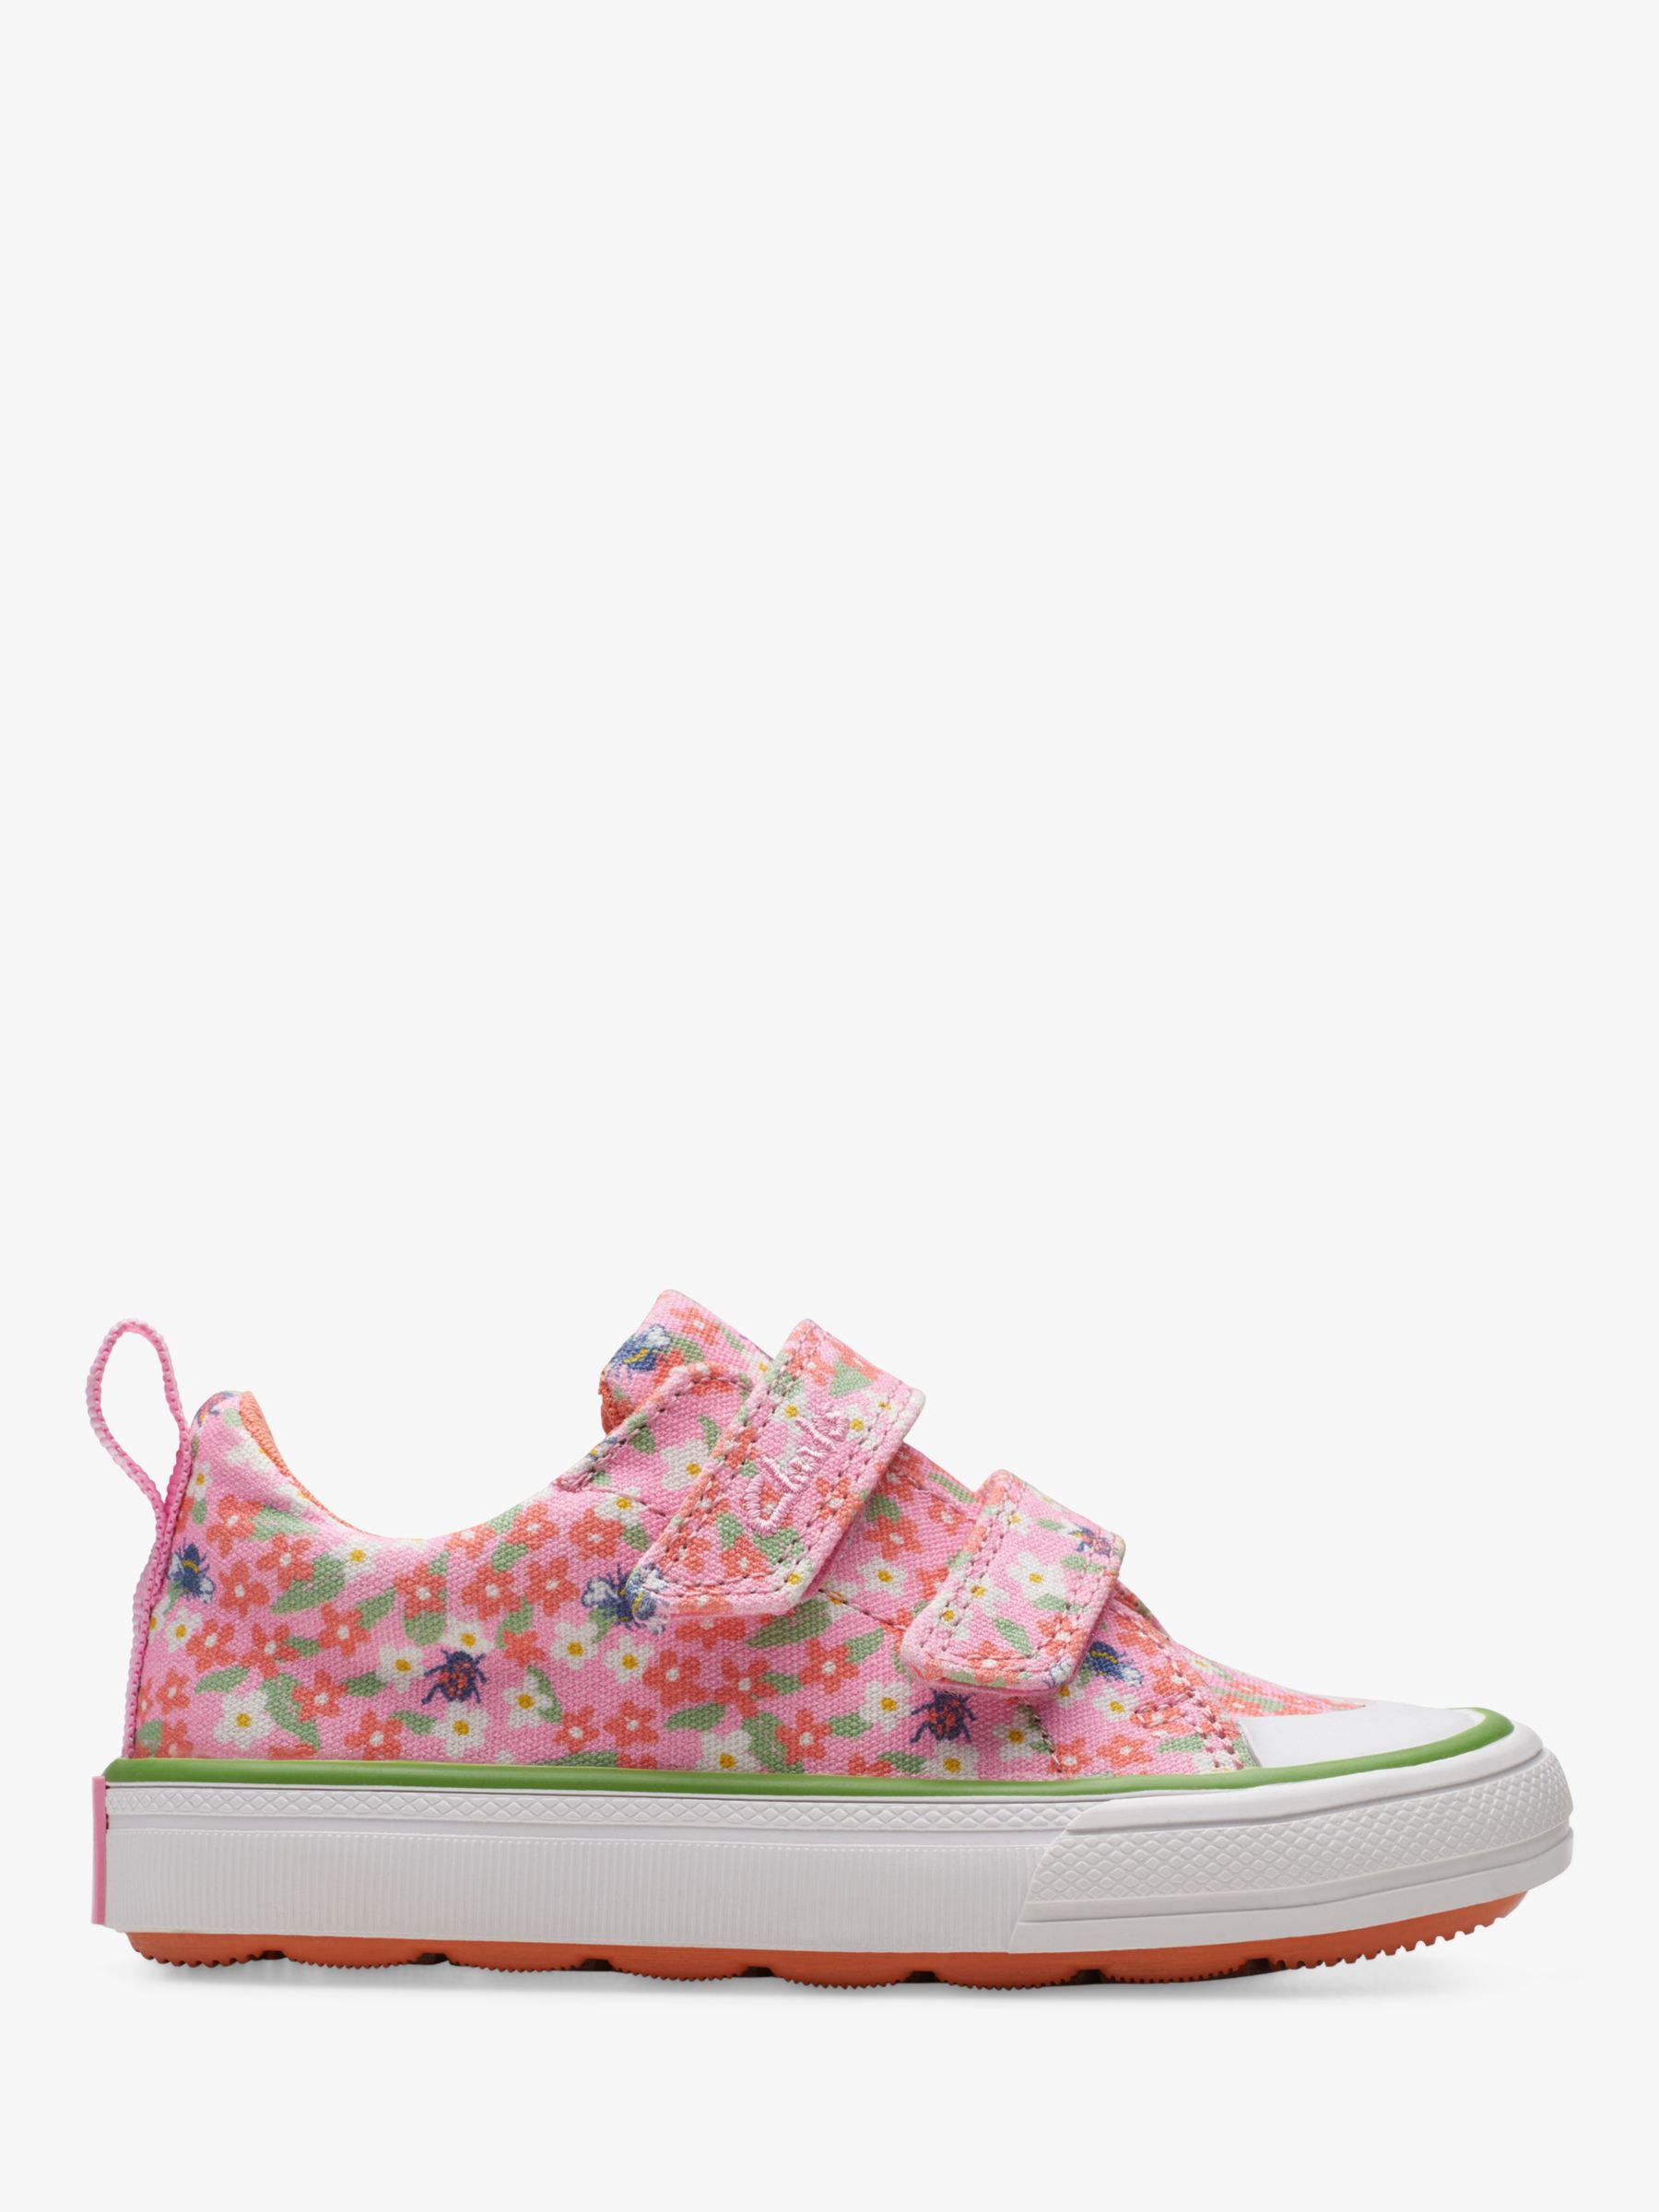 Clarks Kids' Foxing Posey Canvas Shoes, Pink/Multi at John Lewis & Partners